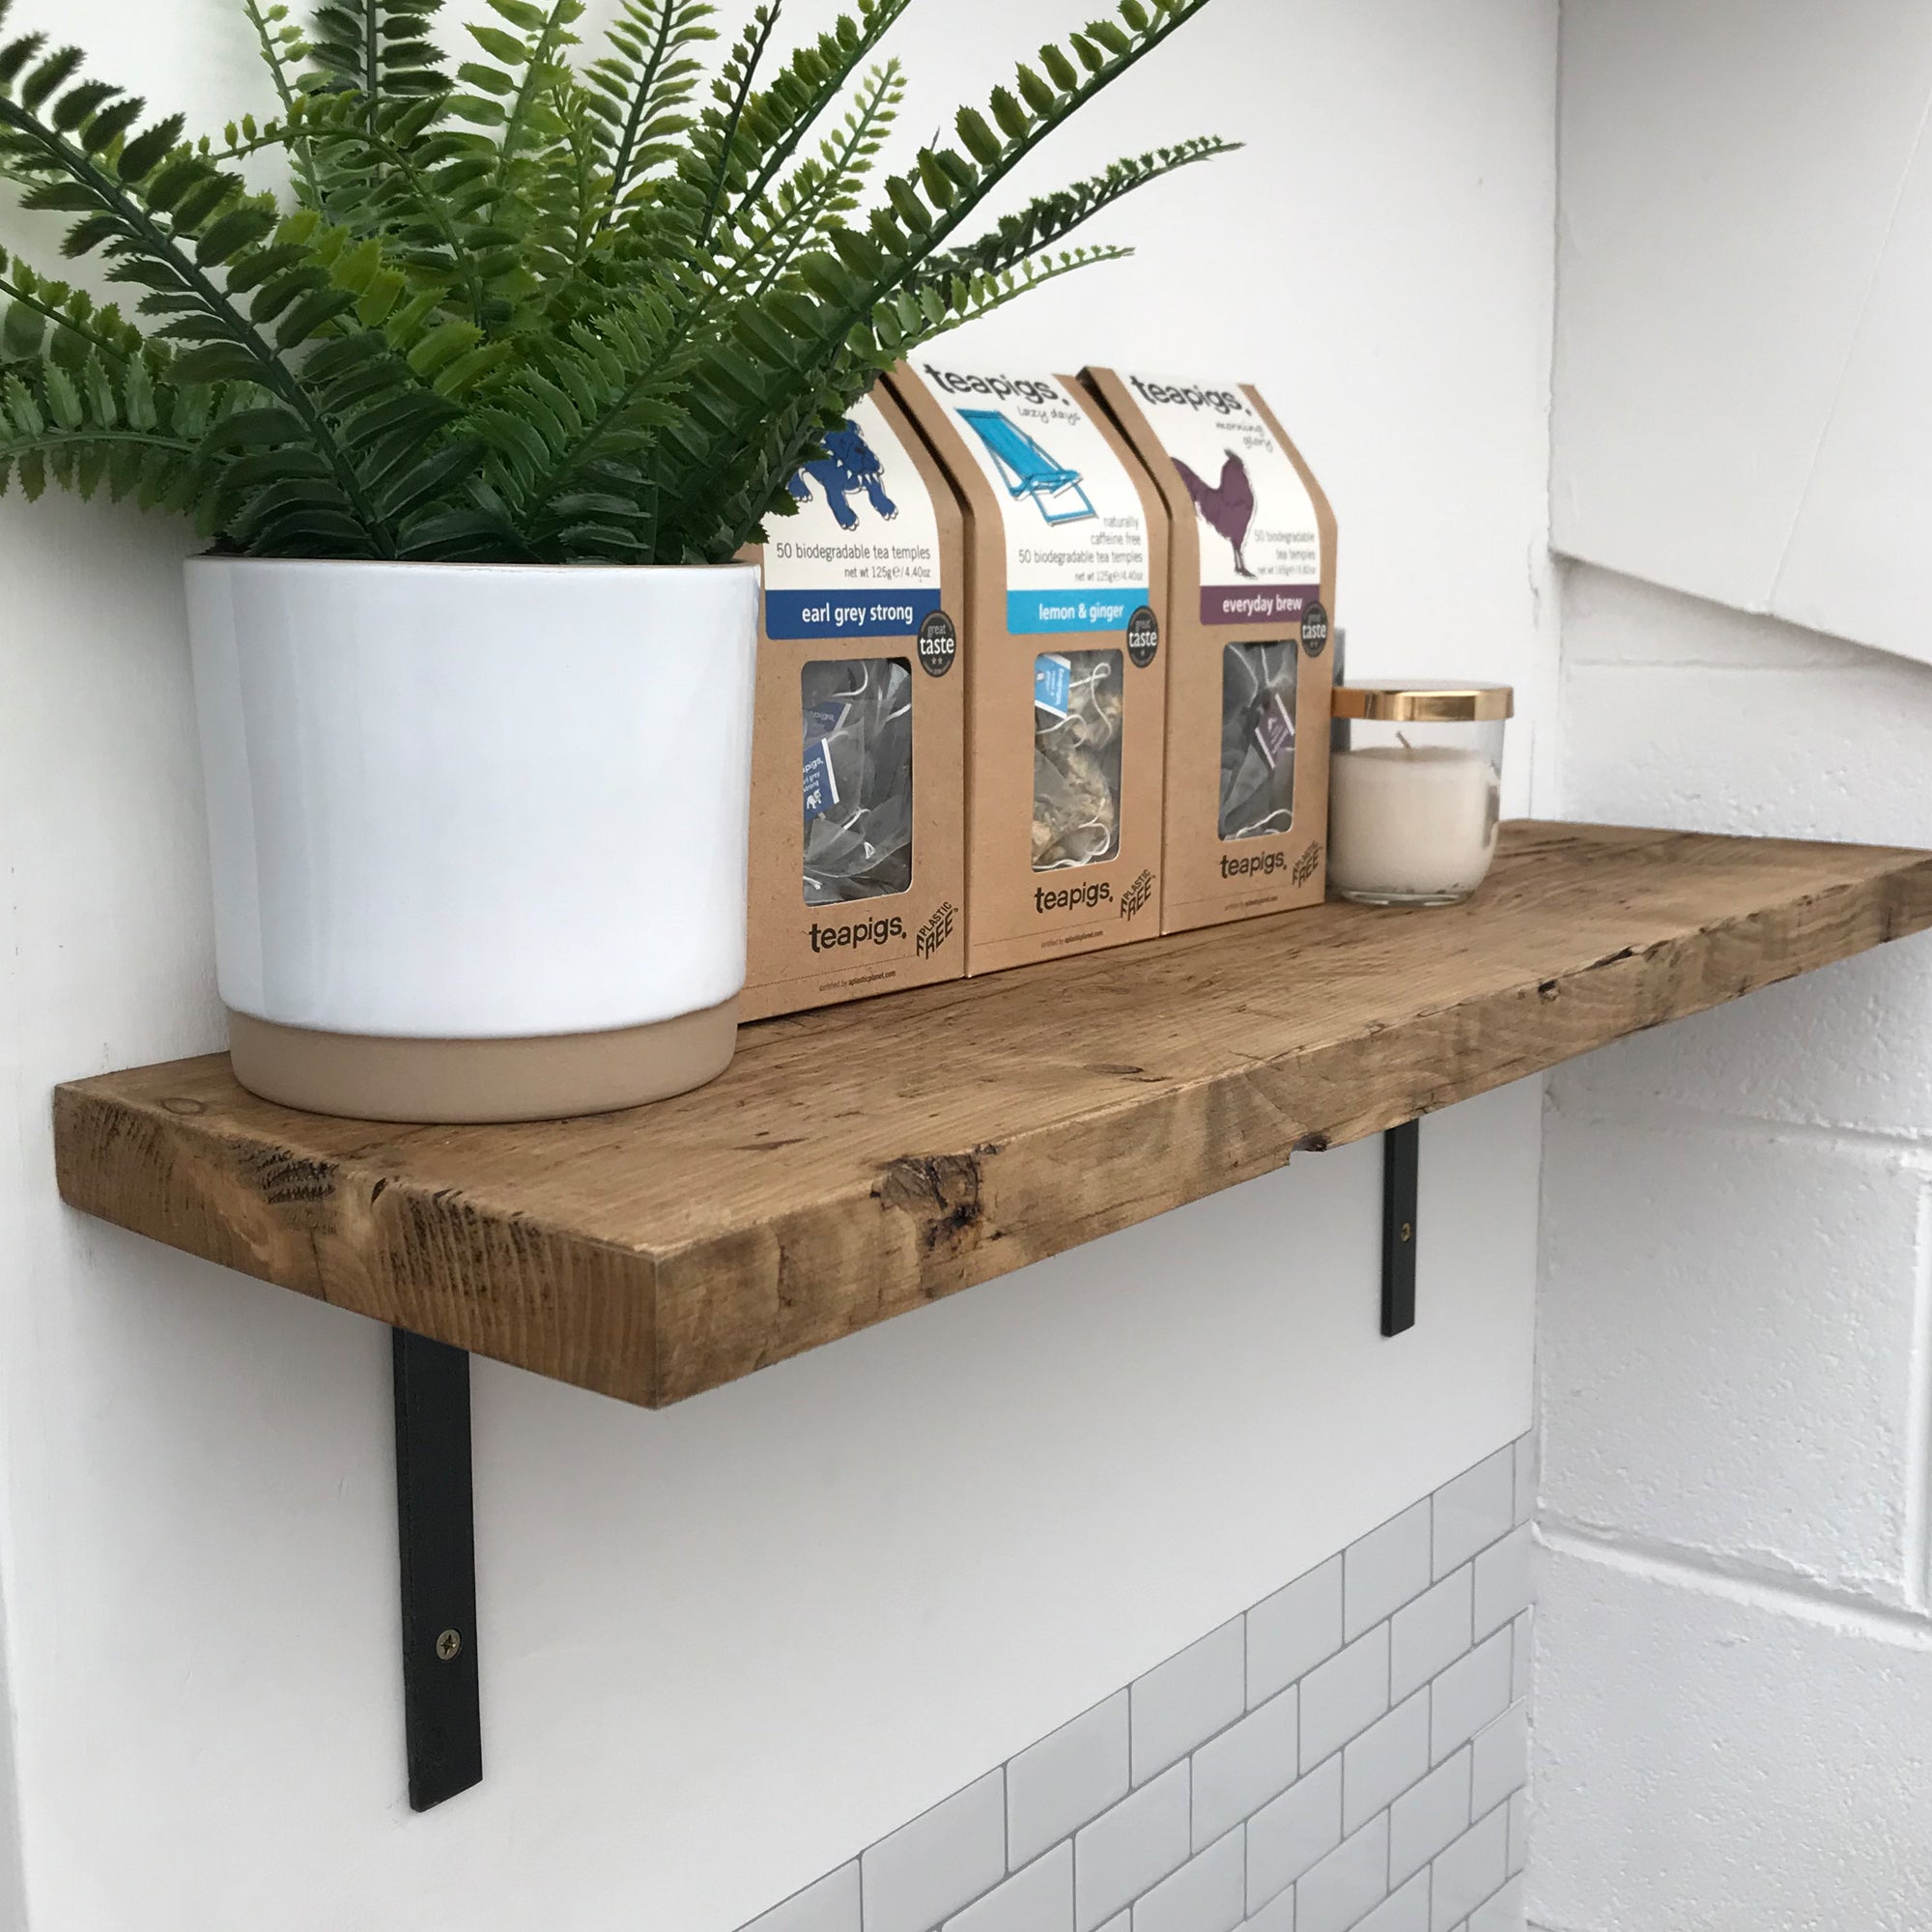 Wooden Shelves Industrial Wall Shelf With Metal Brackets Reclaimed Pine Rustic Kitchen Oak Solid  Shelving Display Restaurant Cafe Made to measure.